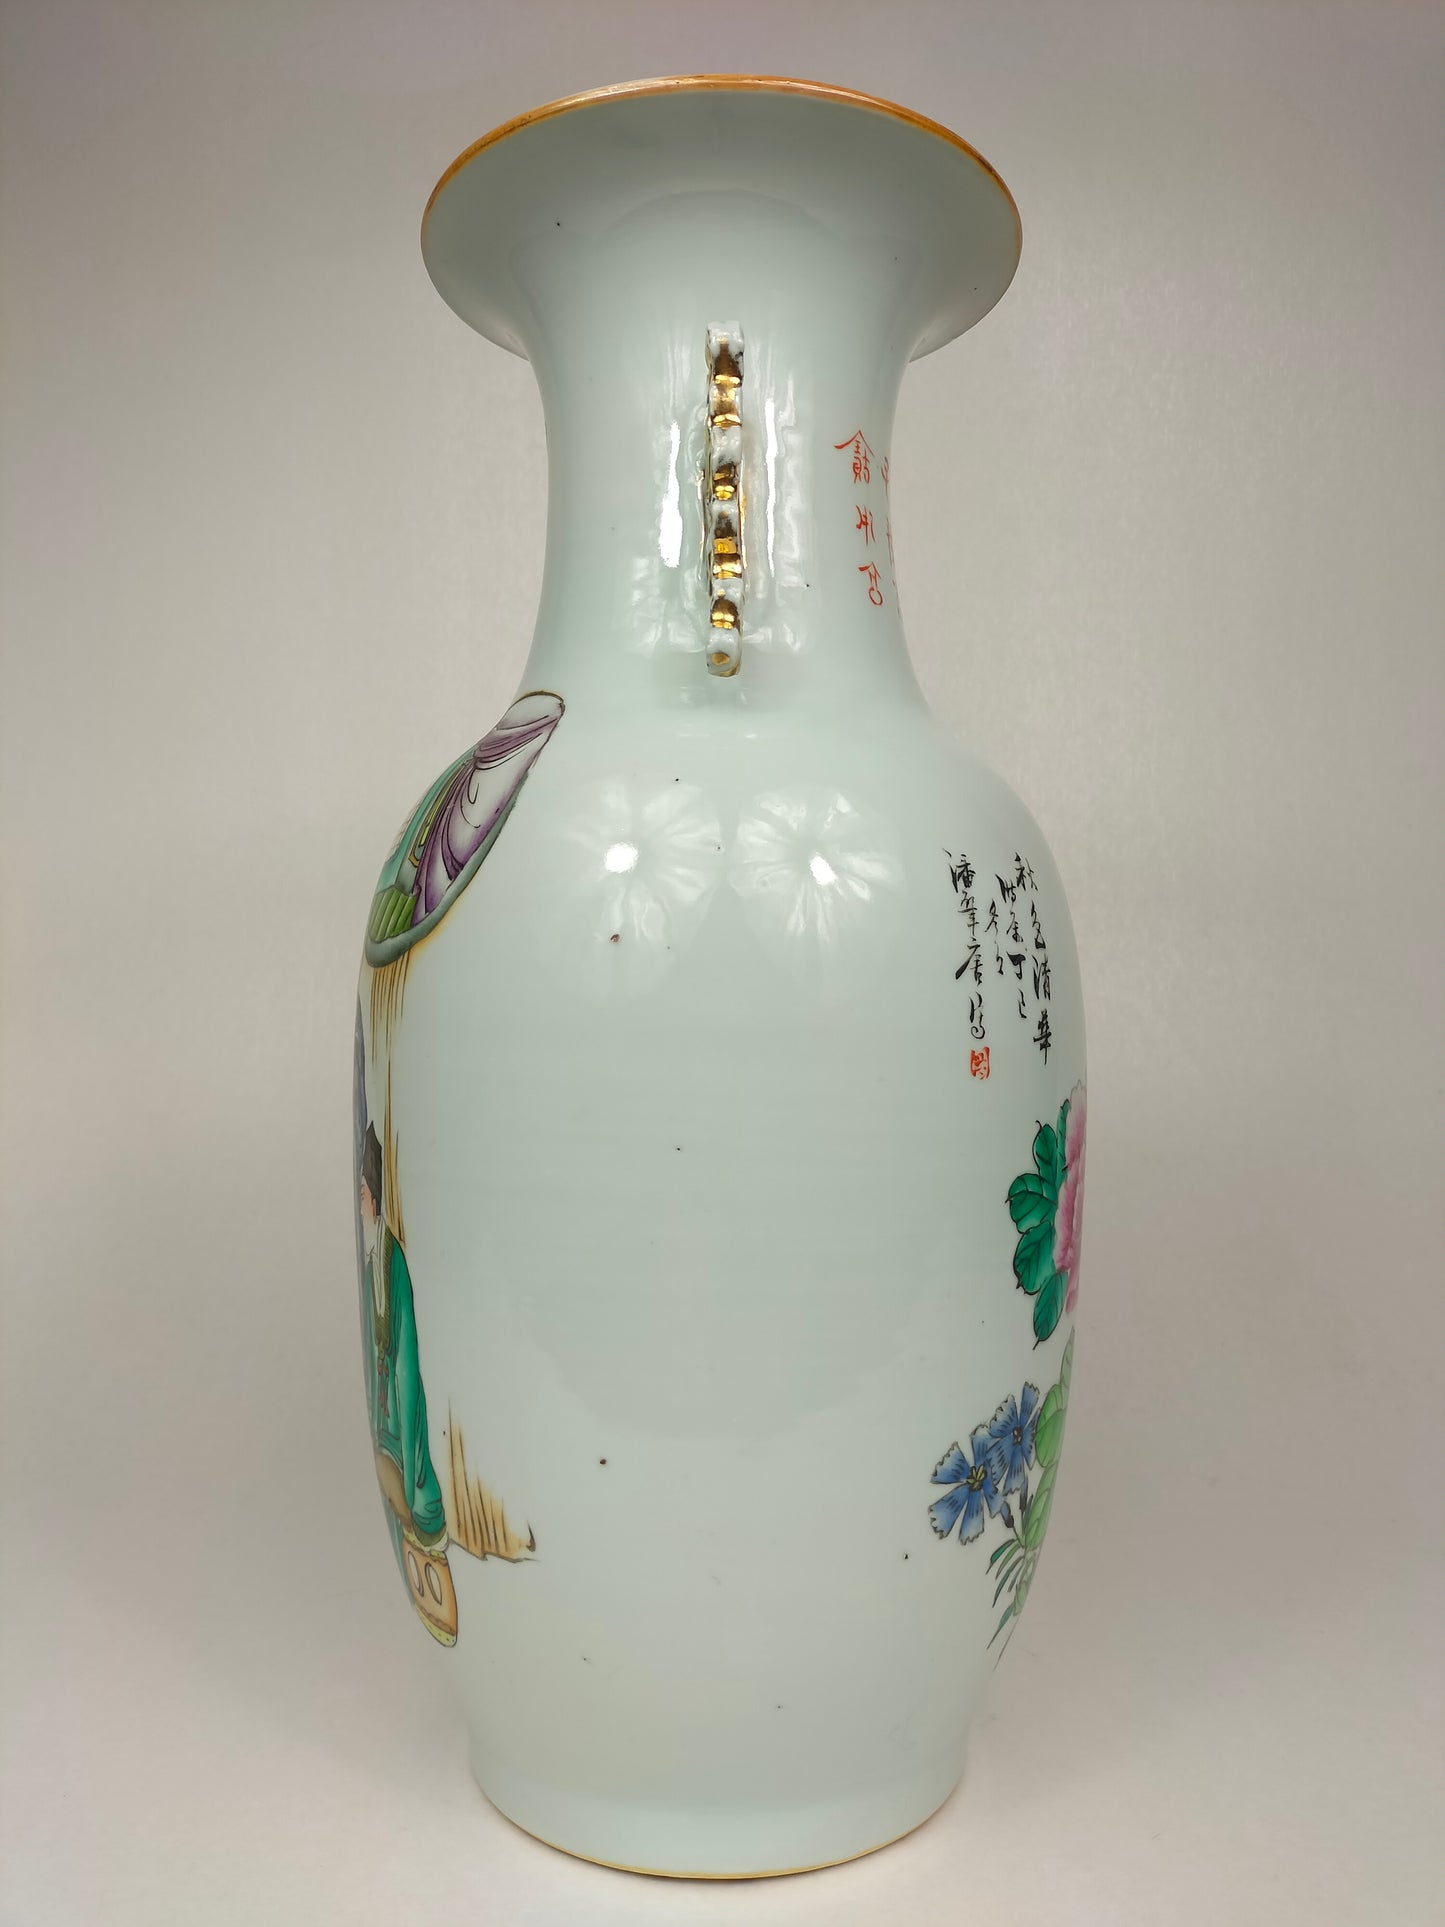 Antique Chinese vase decorated with sages and flowers // Artist signed - Republic Period (1912-1949)